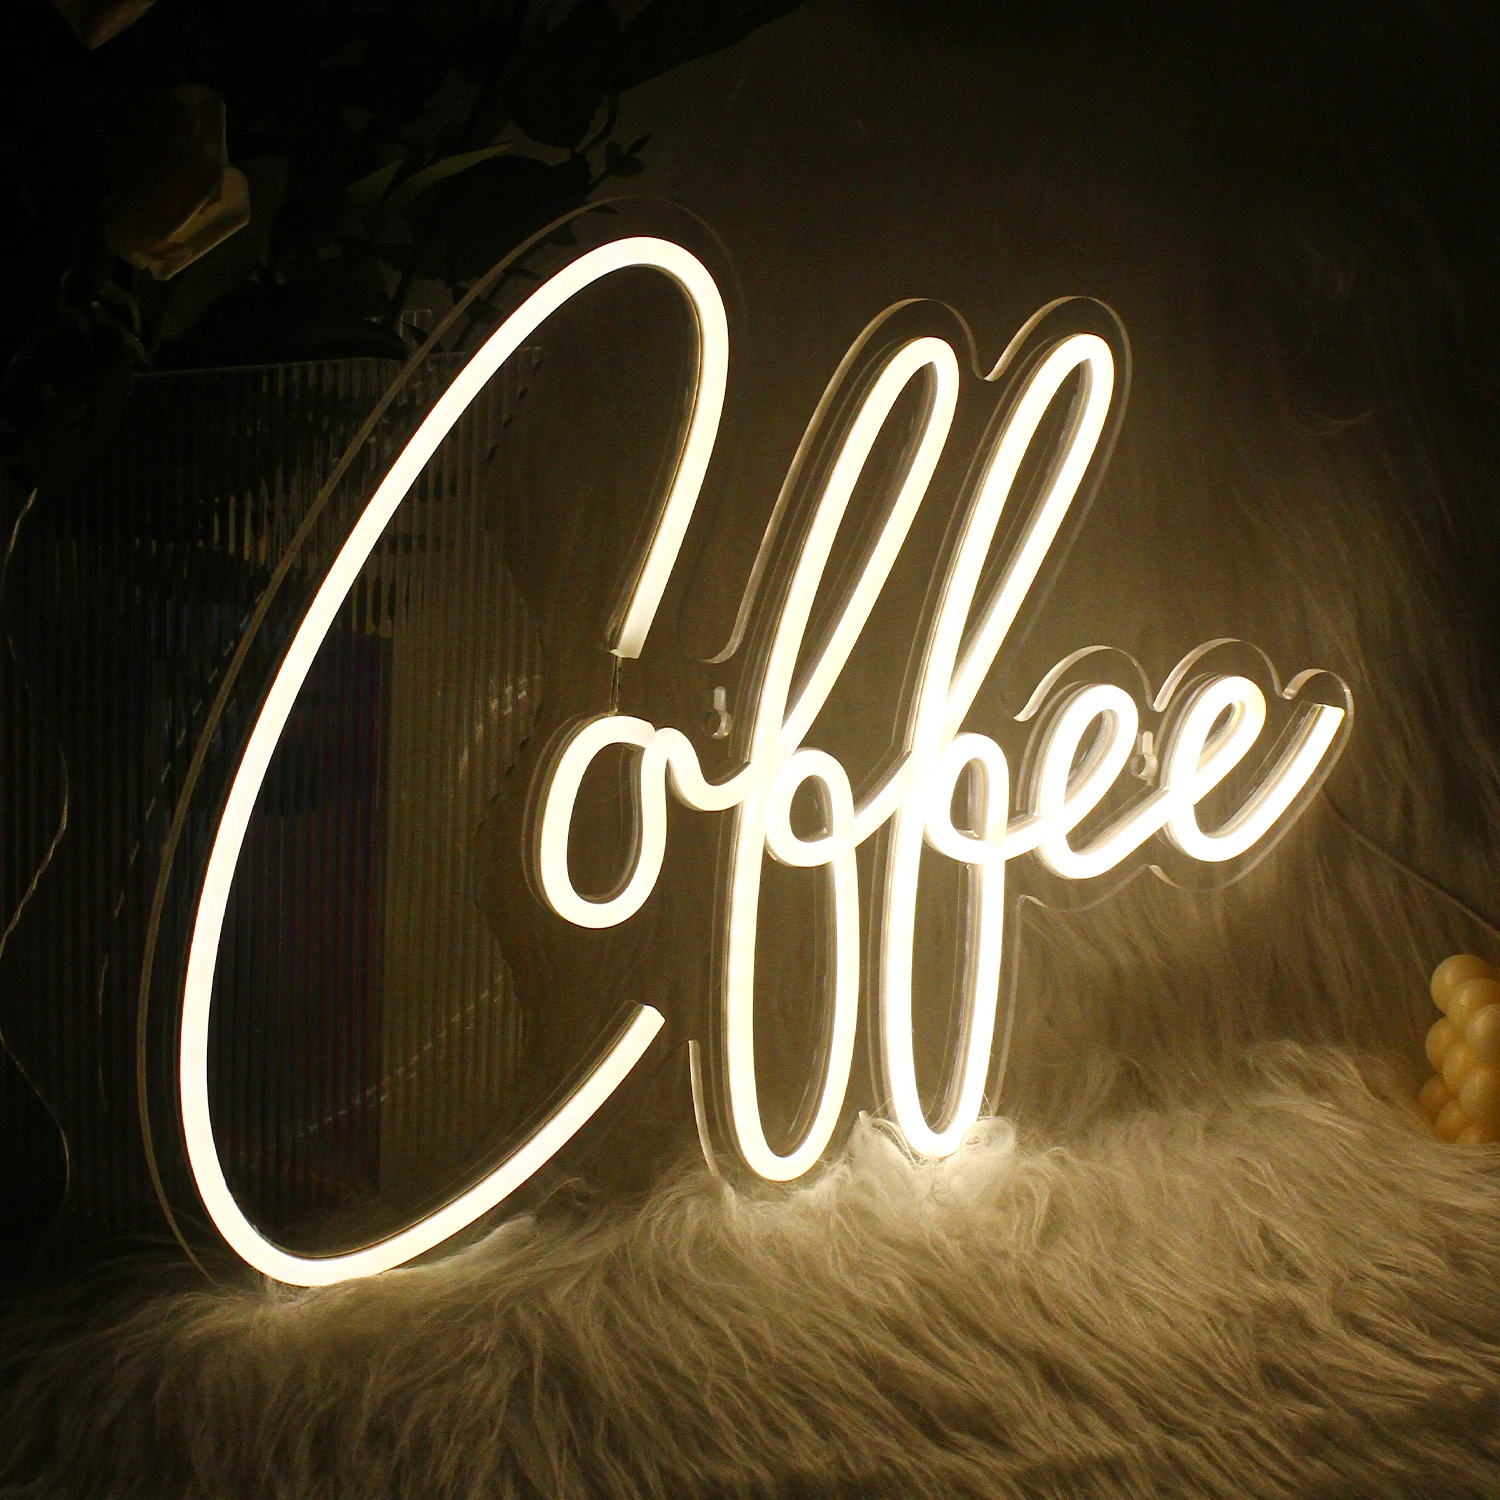 Coffce Neon Sigh LED Lights Wall Lamp Decor For Home Bar Party Festa Cafe Logo Letter Welcome Light Up Sighs USB Room Decoration